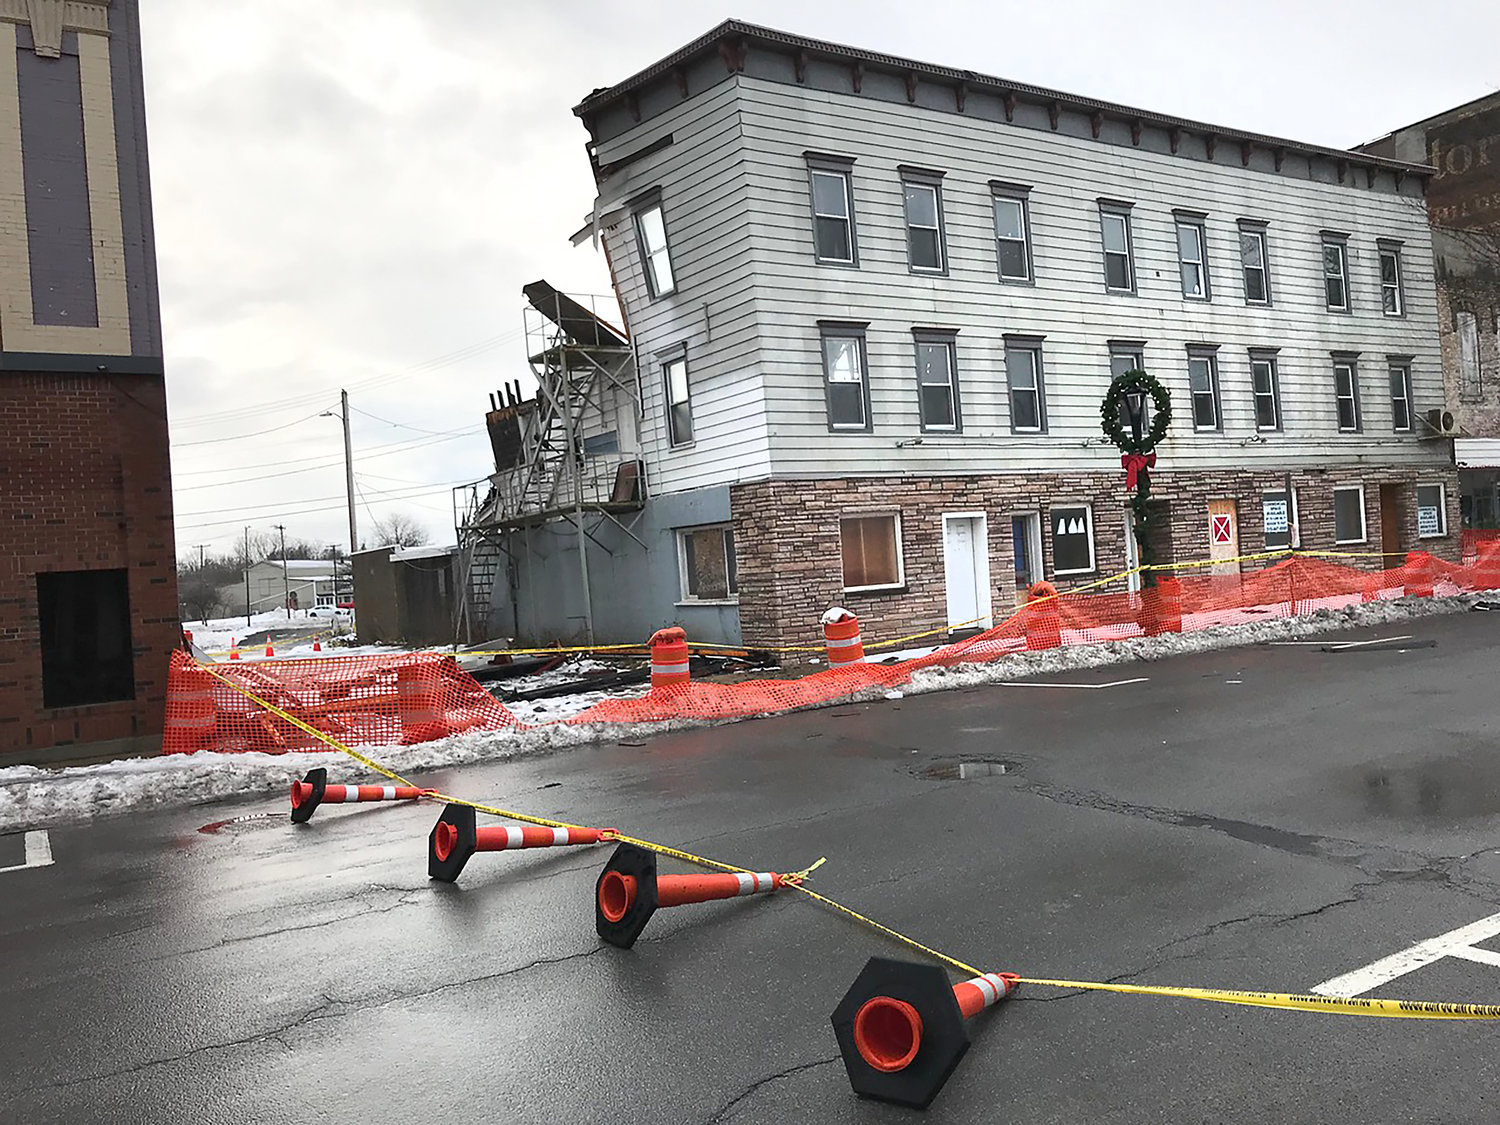 Madison Street in Oneida was closed from Main Street to Williams Street for an undetermined time as of Friday morning after a building collapse. The first floor of the location was the former Madison House Restaurant.